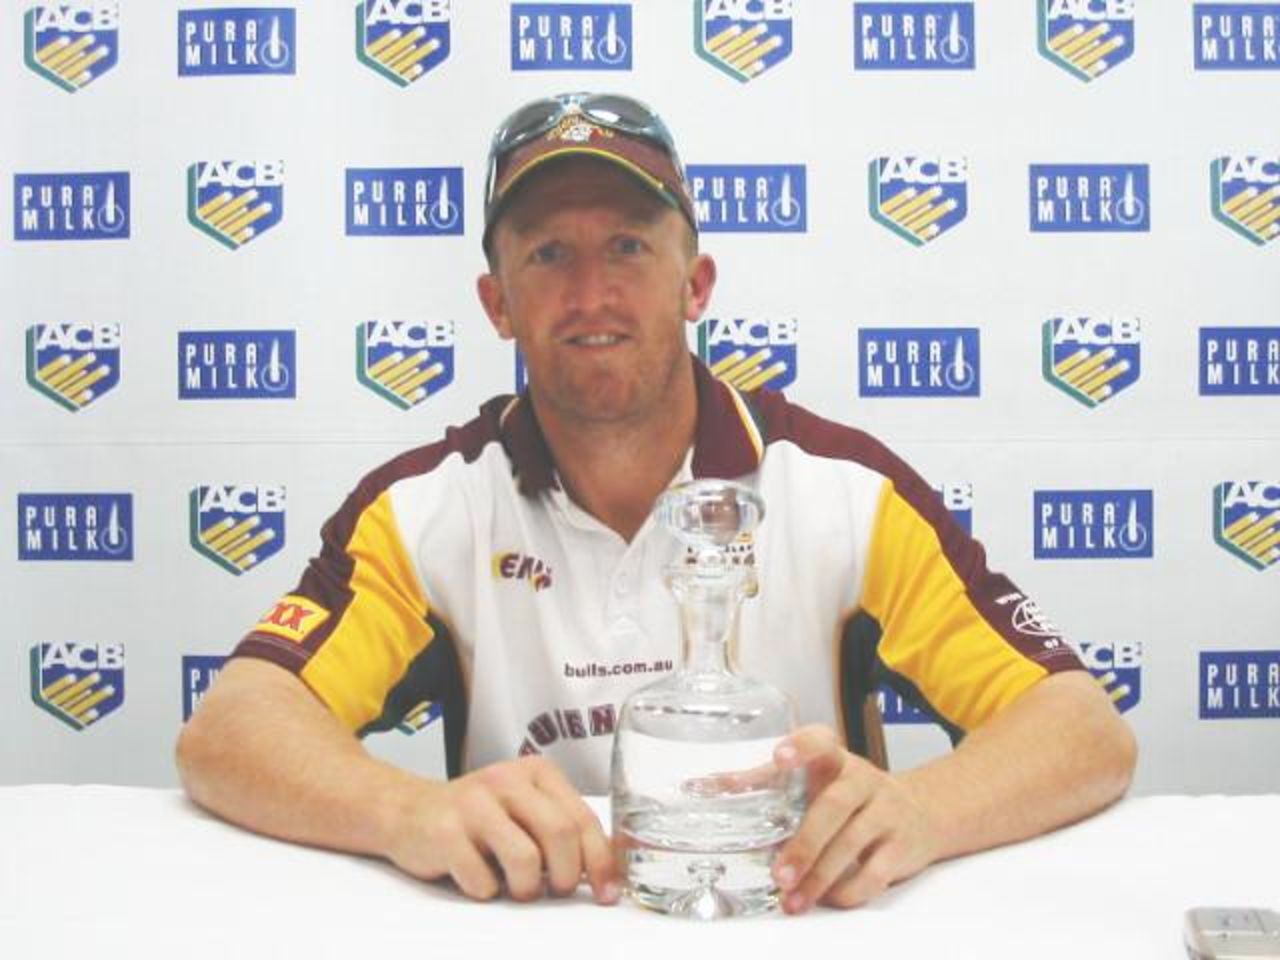 After Queensland defeated Western Australia by 7 wickets at the WACA, Queenslander Clinton Perren was awarded the man of the match trophy.